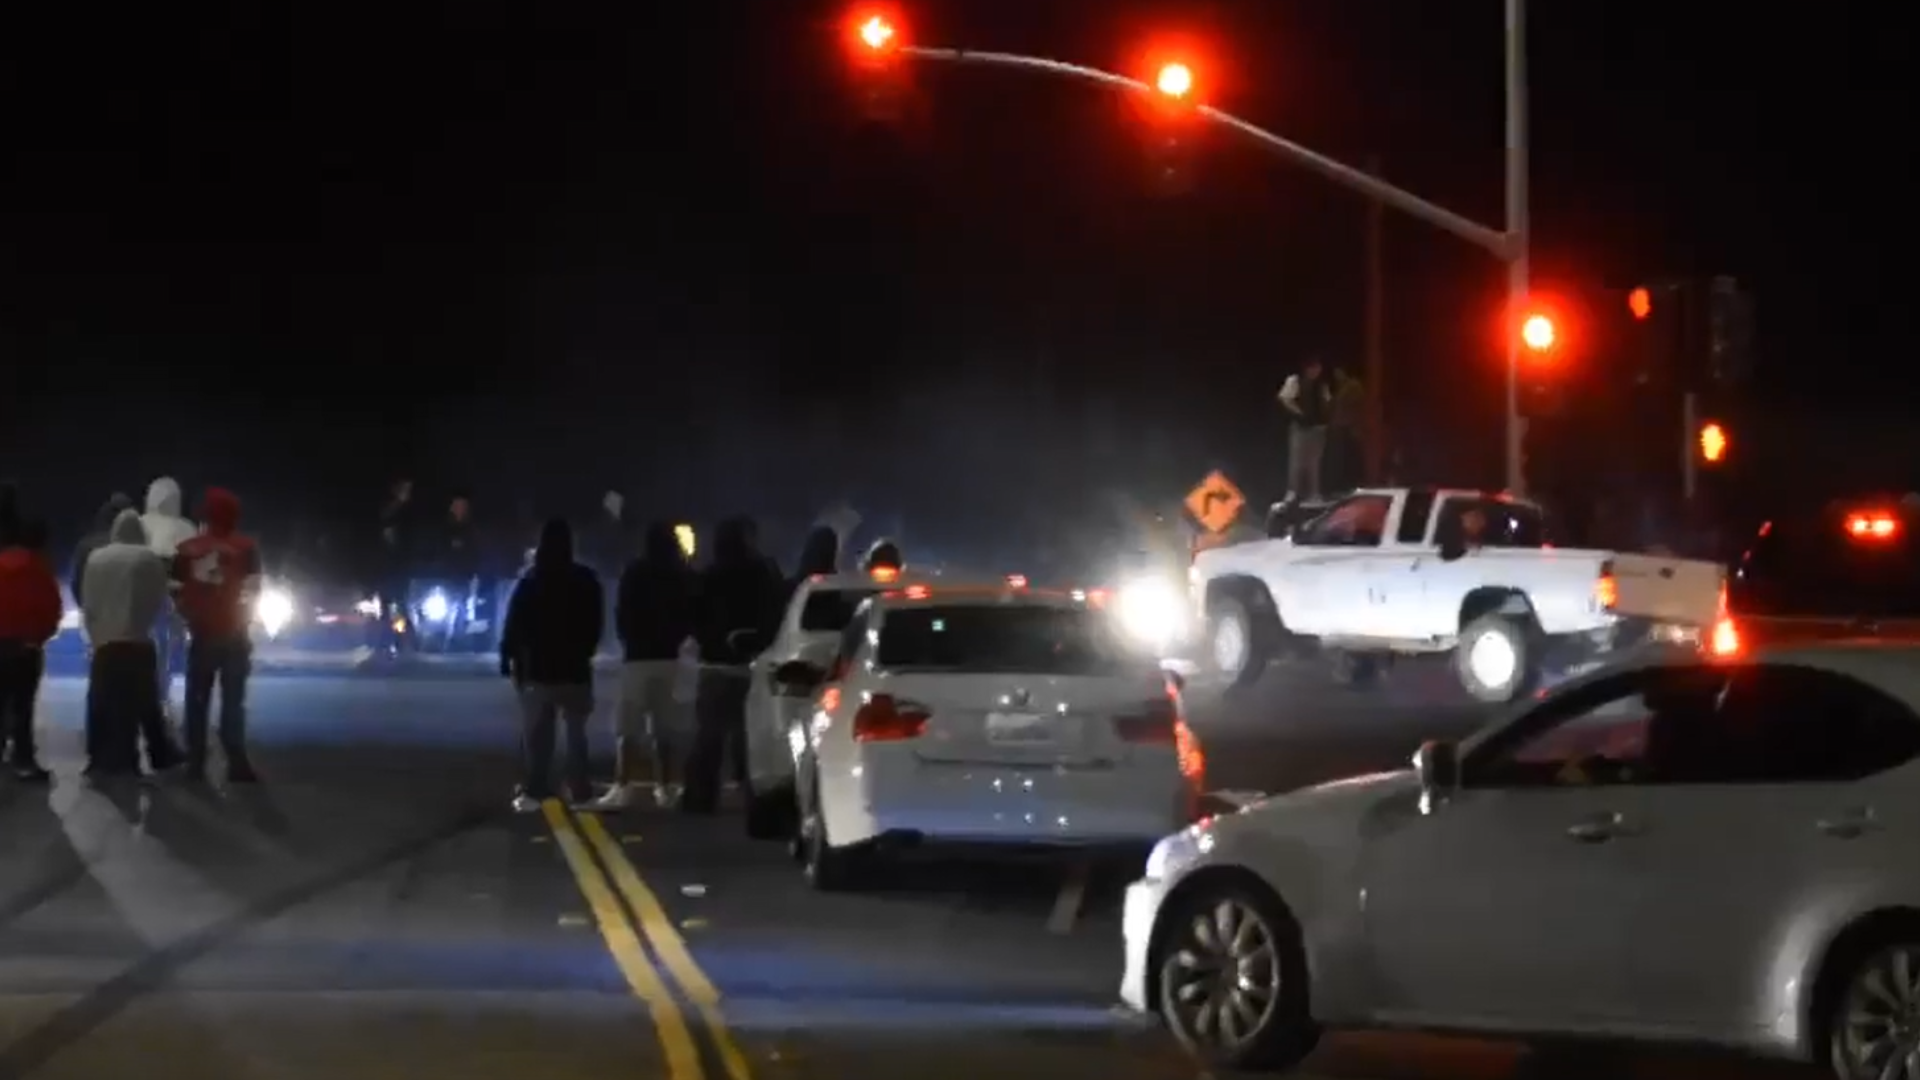 A "sideshow" in Fairfield by Pennsylvania Avenue and Highway 12 shut down the intersection on May 12. A witness, Nicholas Wilson, said it was the biggest he had ever seen.